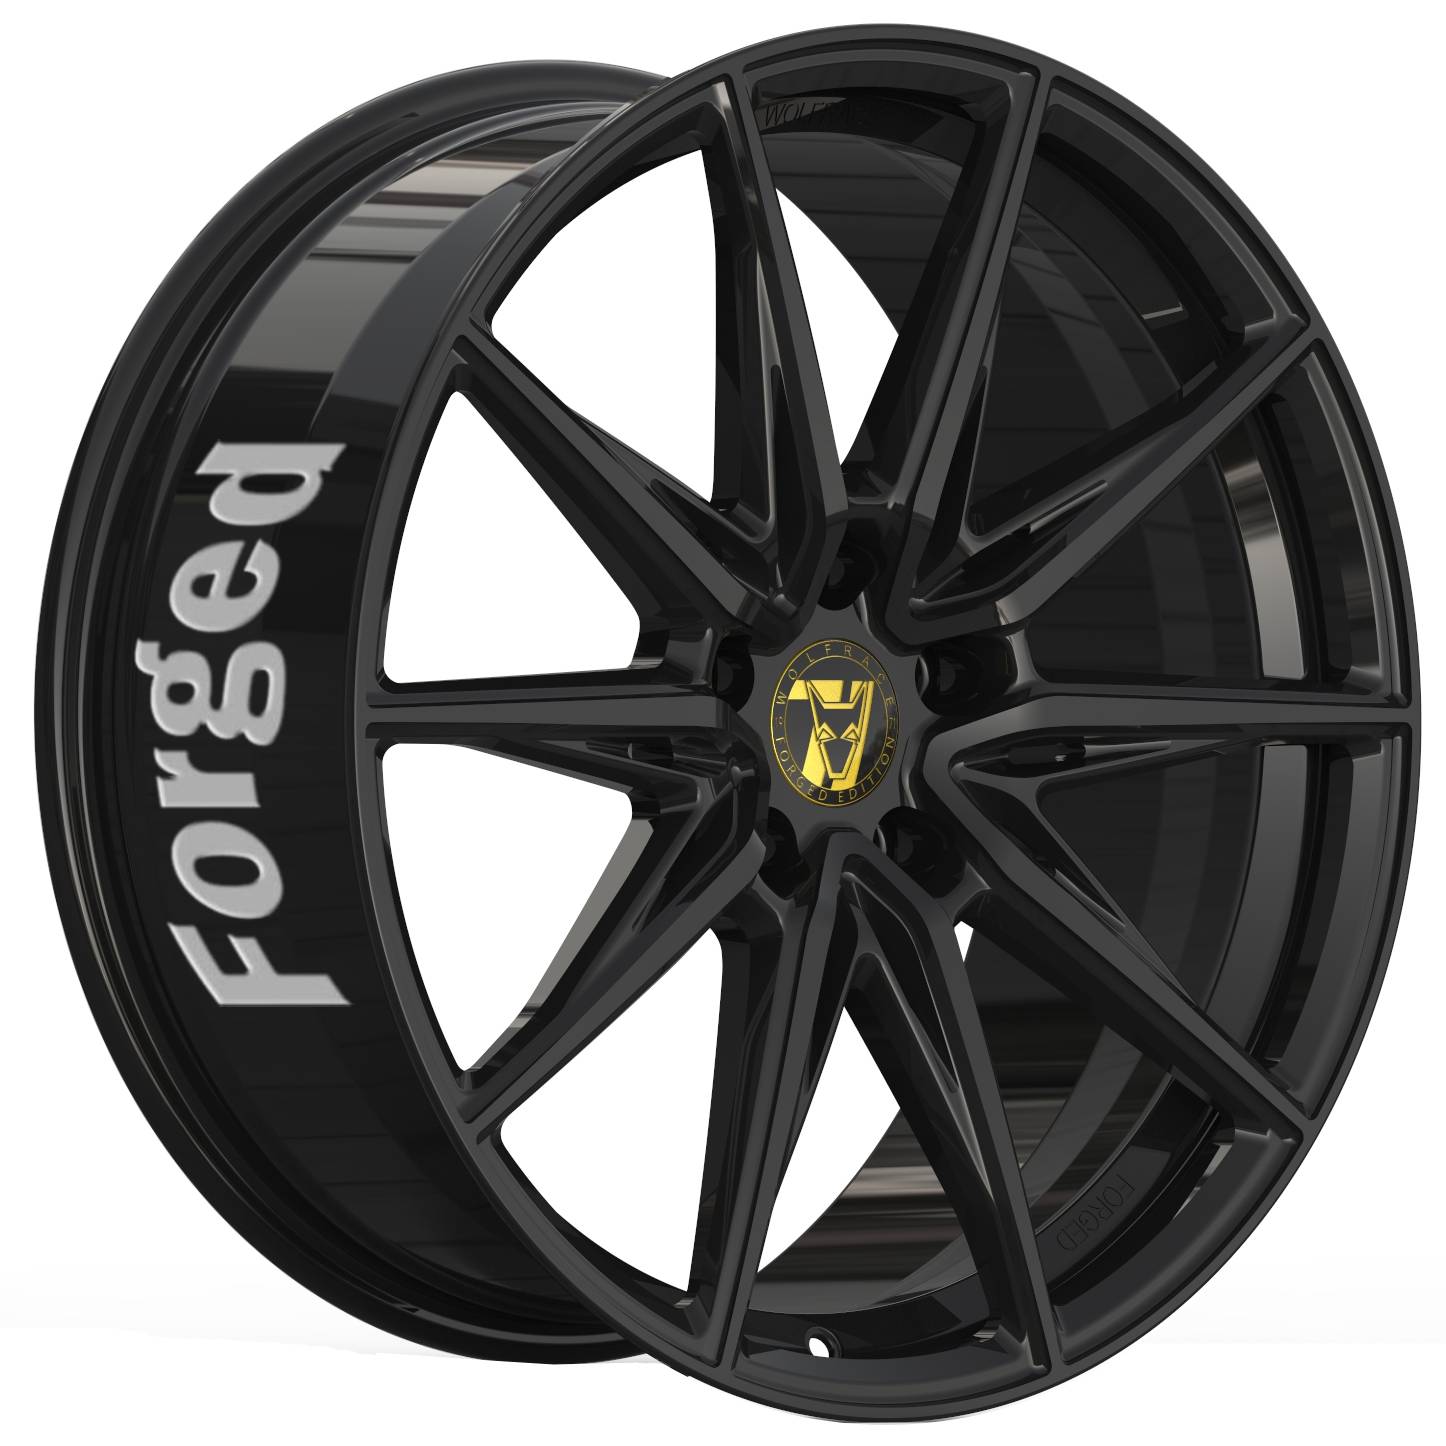 Demon Wheels 71 Forged Edition Urban Racer Forged [9.5x23] -5x108- ET 35